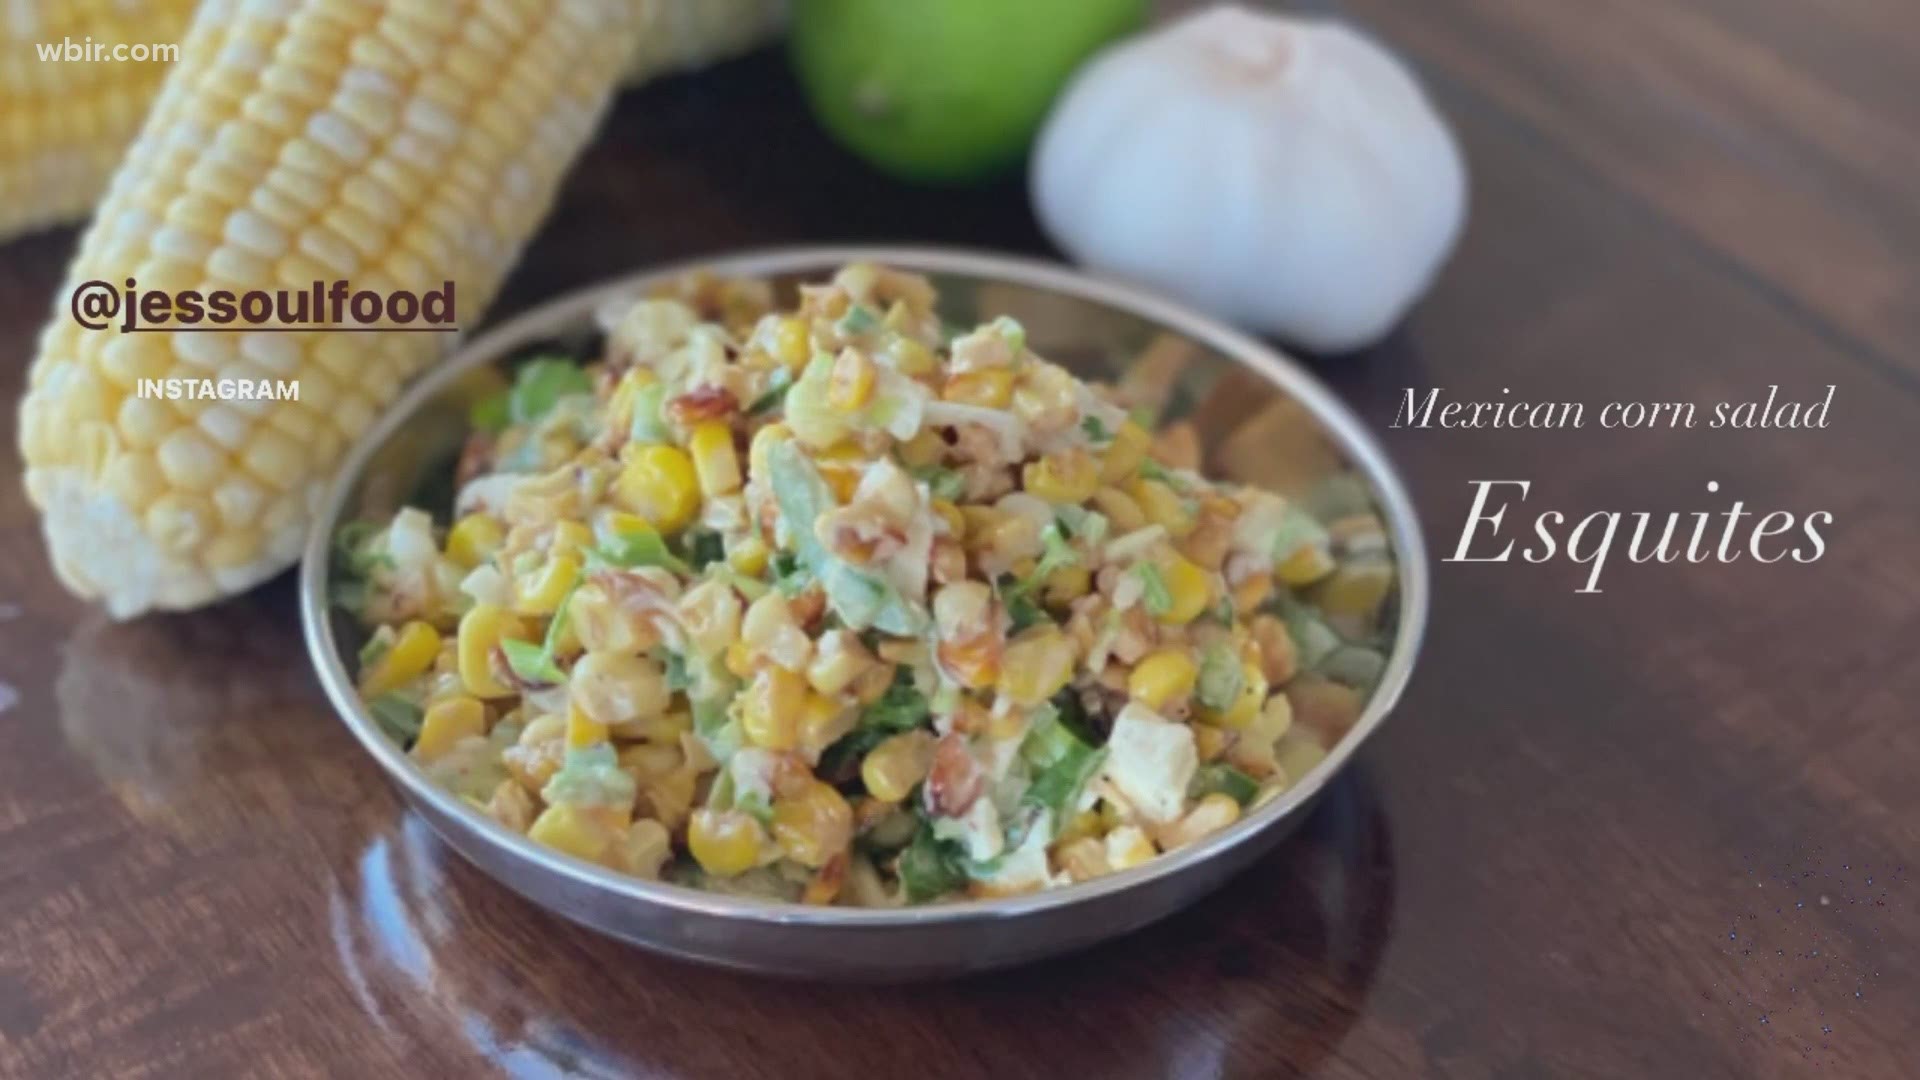 Chef Jes Thomas makes a corn salad recipe. Follow her on Instagram @jessoulfood. June 22, 2021-4pm.